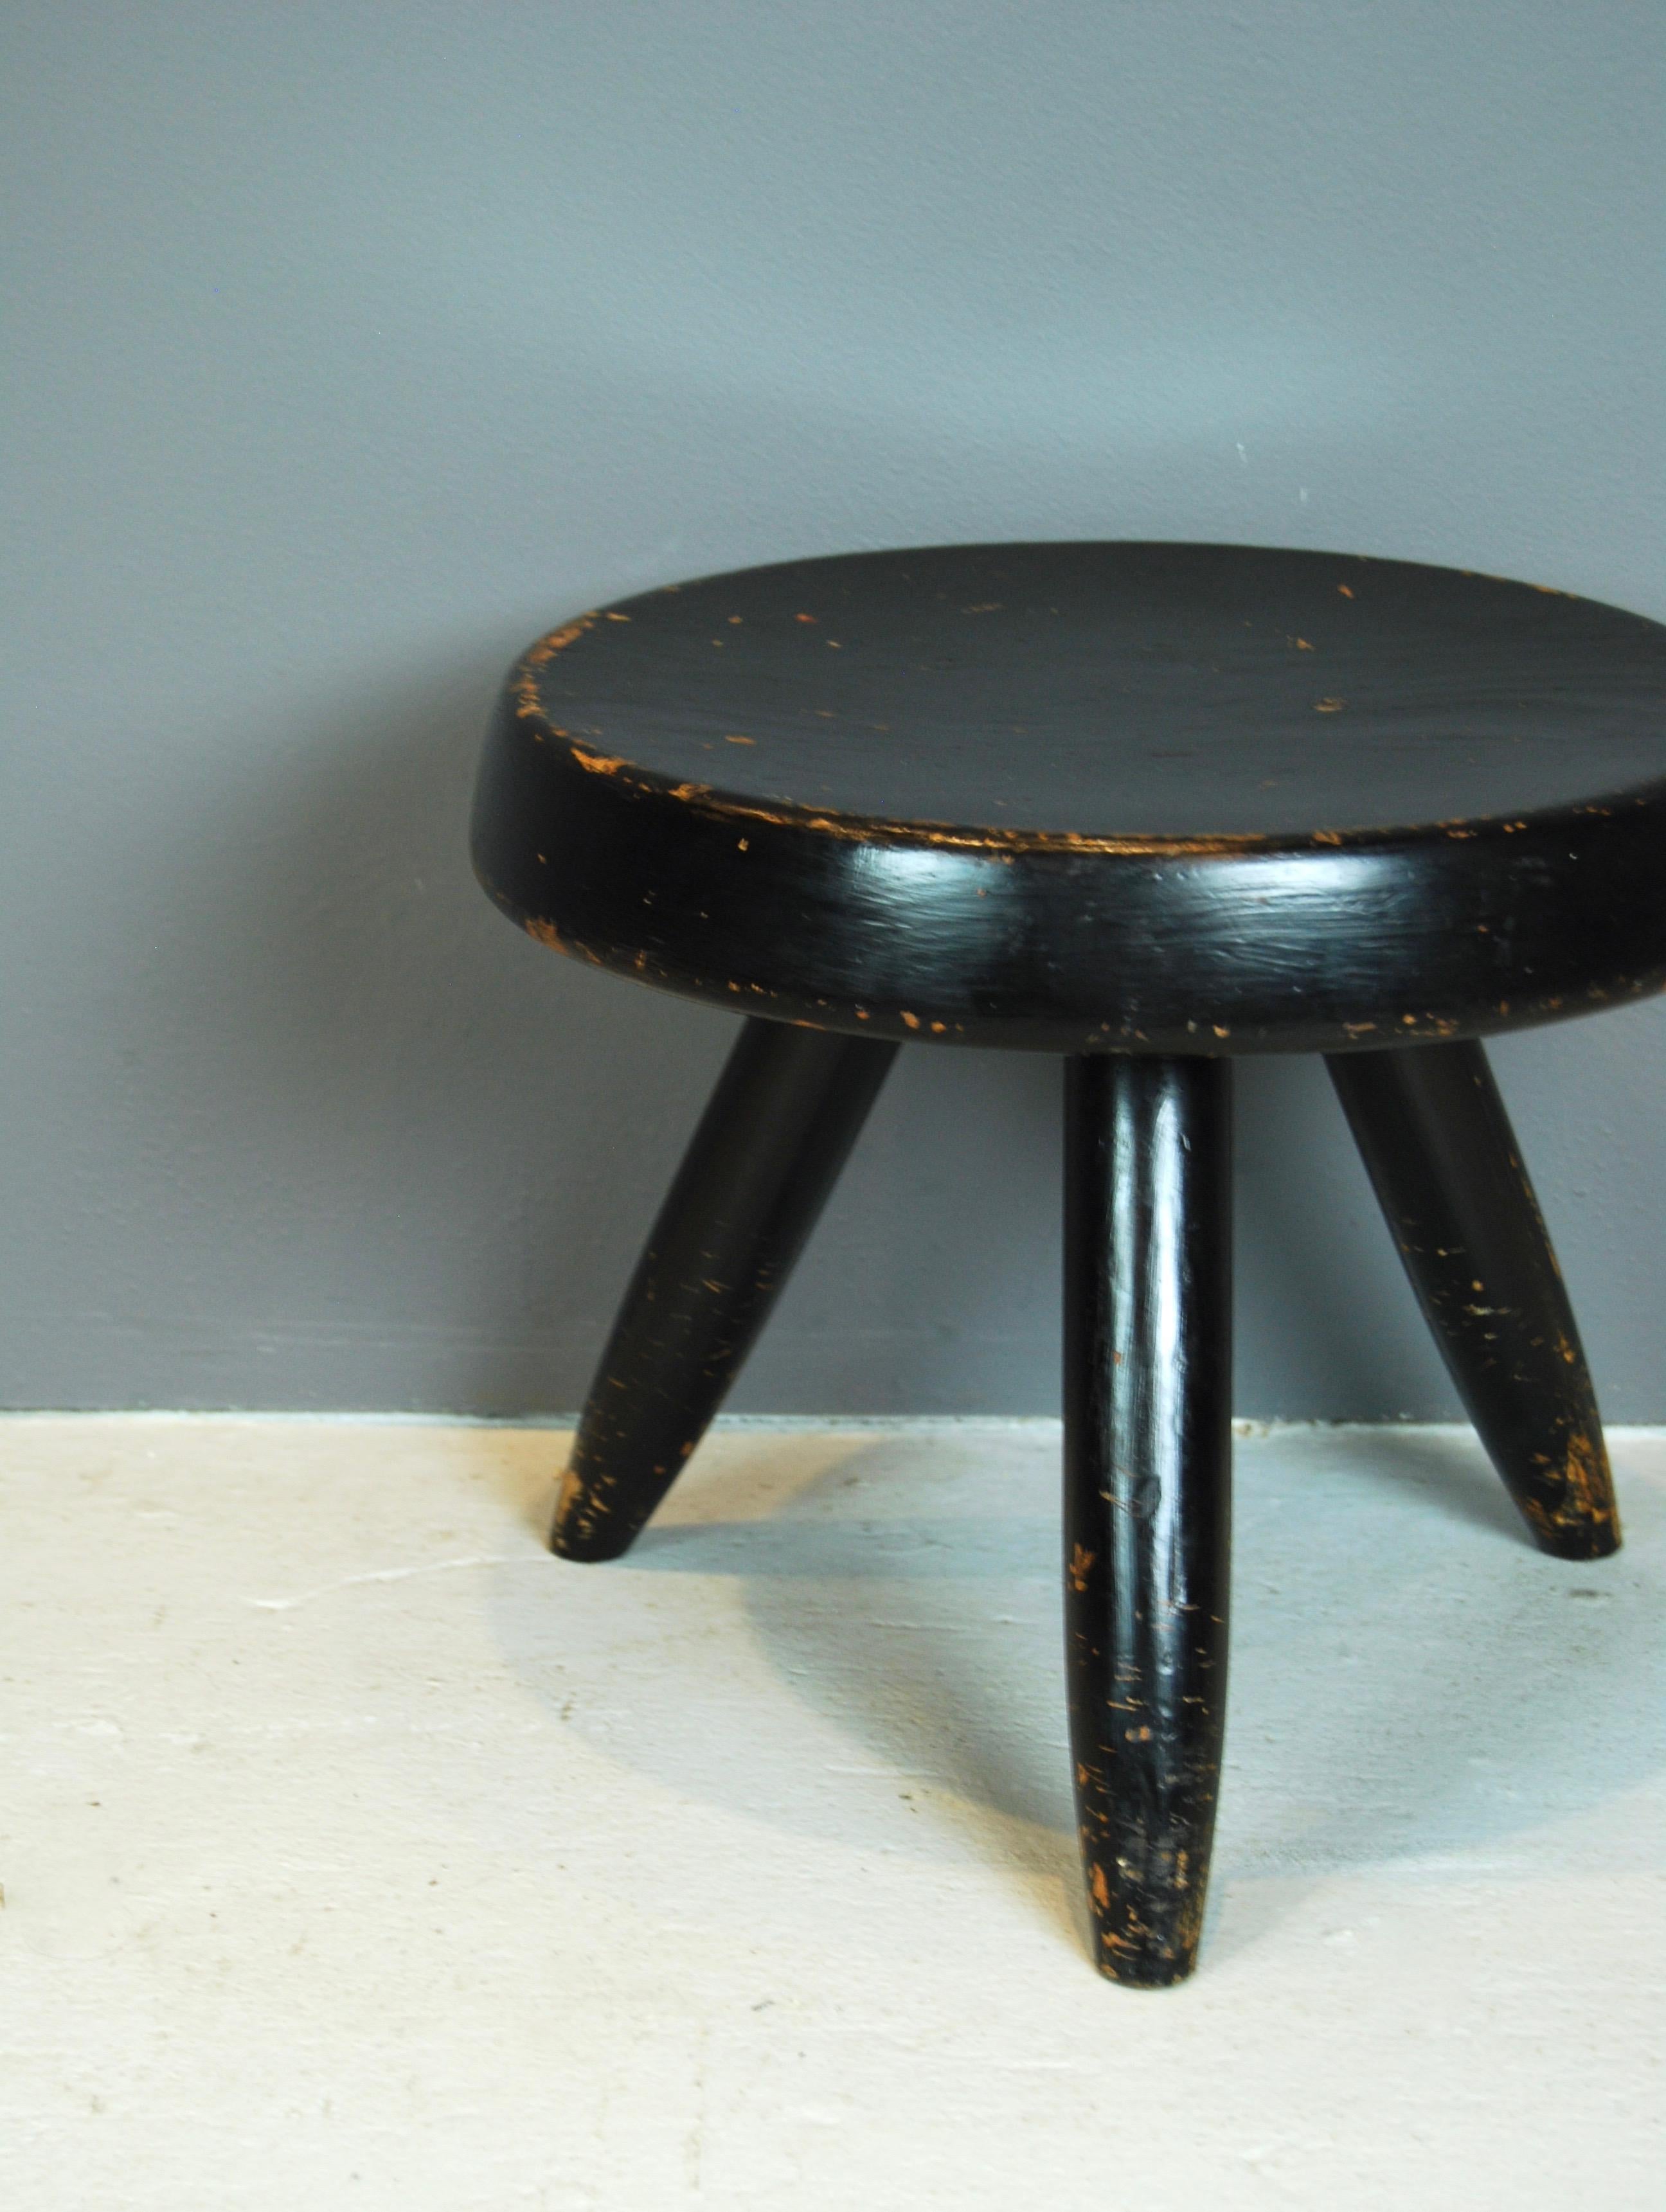 Solid elm, low stool by Charlotte Perriand, stained black, designed in 1953 and distributed by Steph Simon Gallery in Paris.
Stool is in original condition with signs of ware and age.